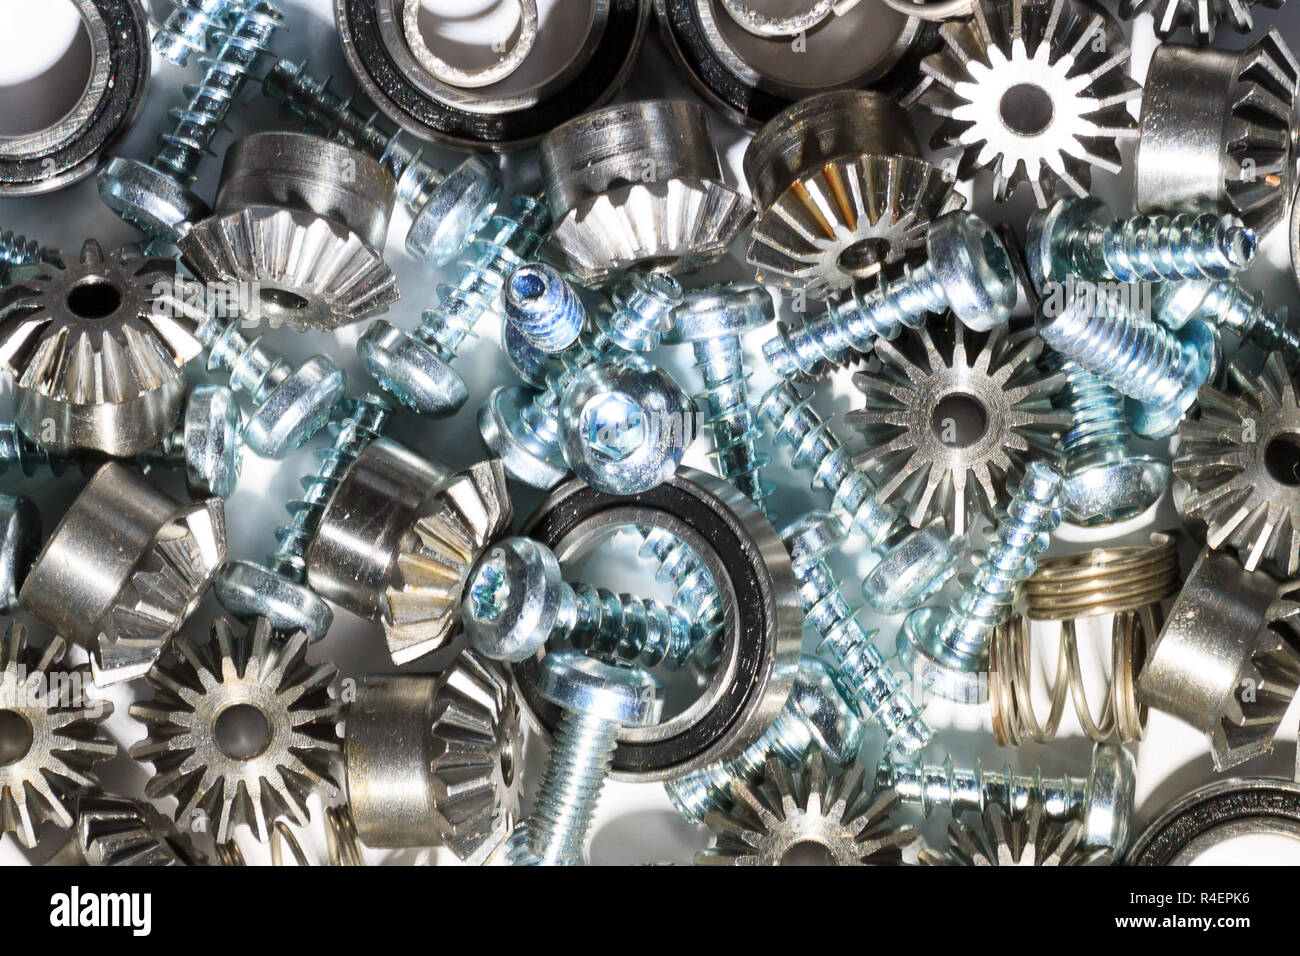 Mechanical components Stock Photo